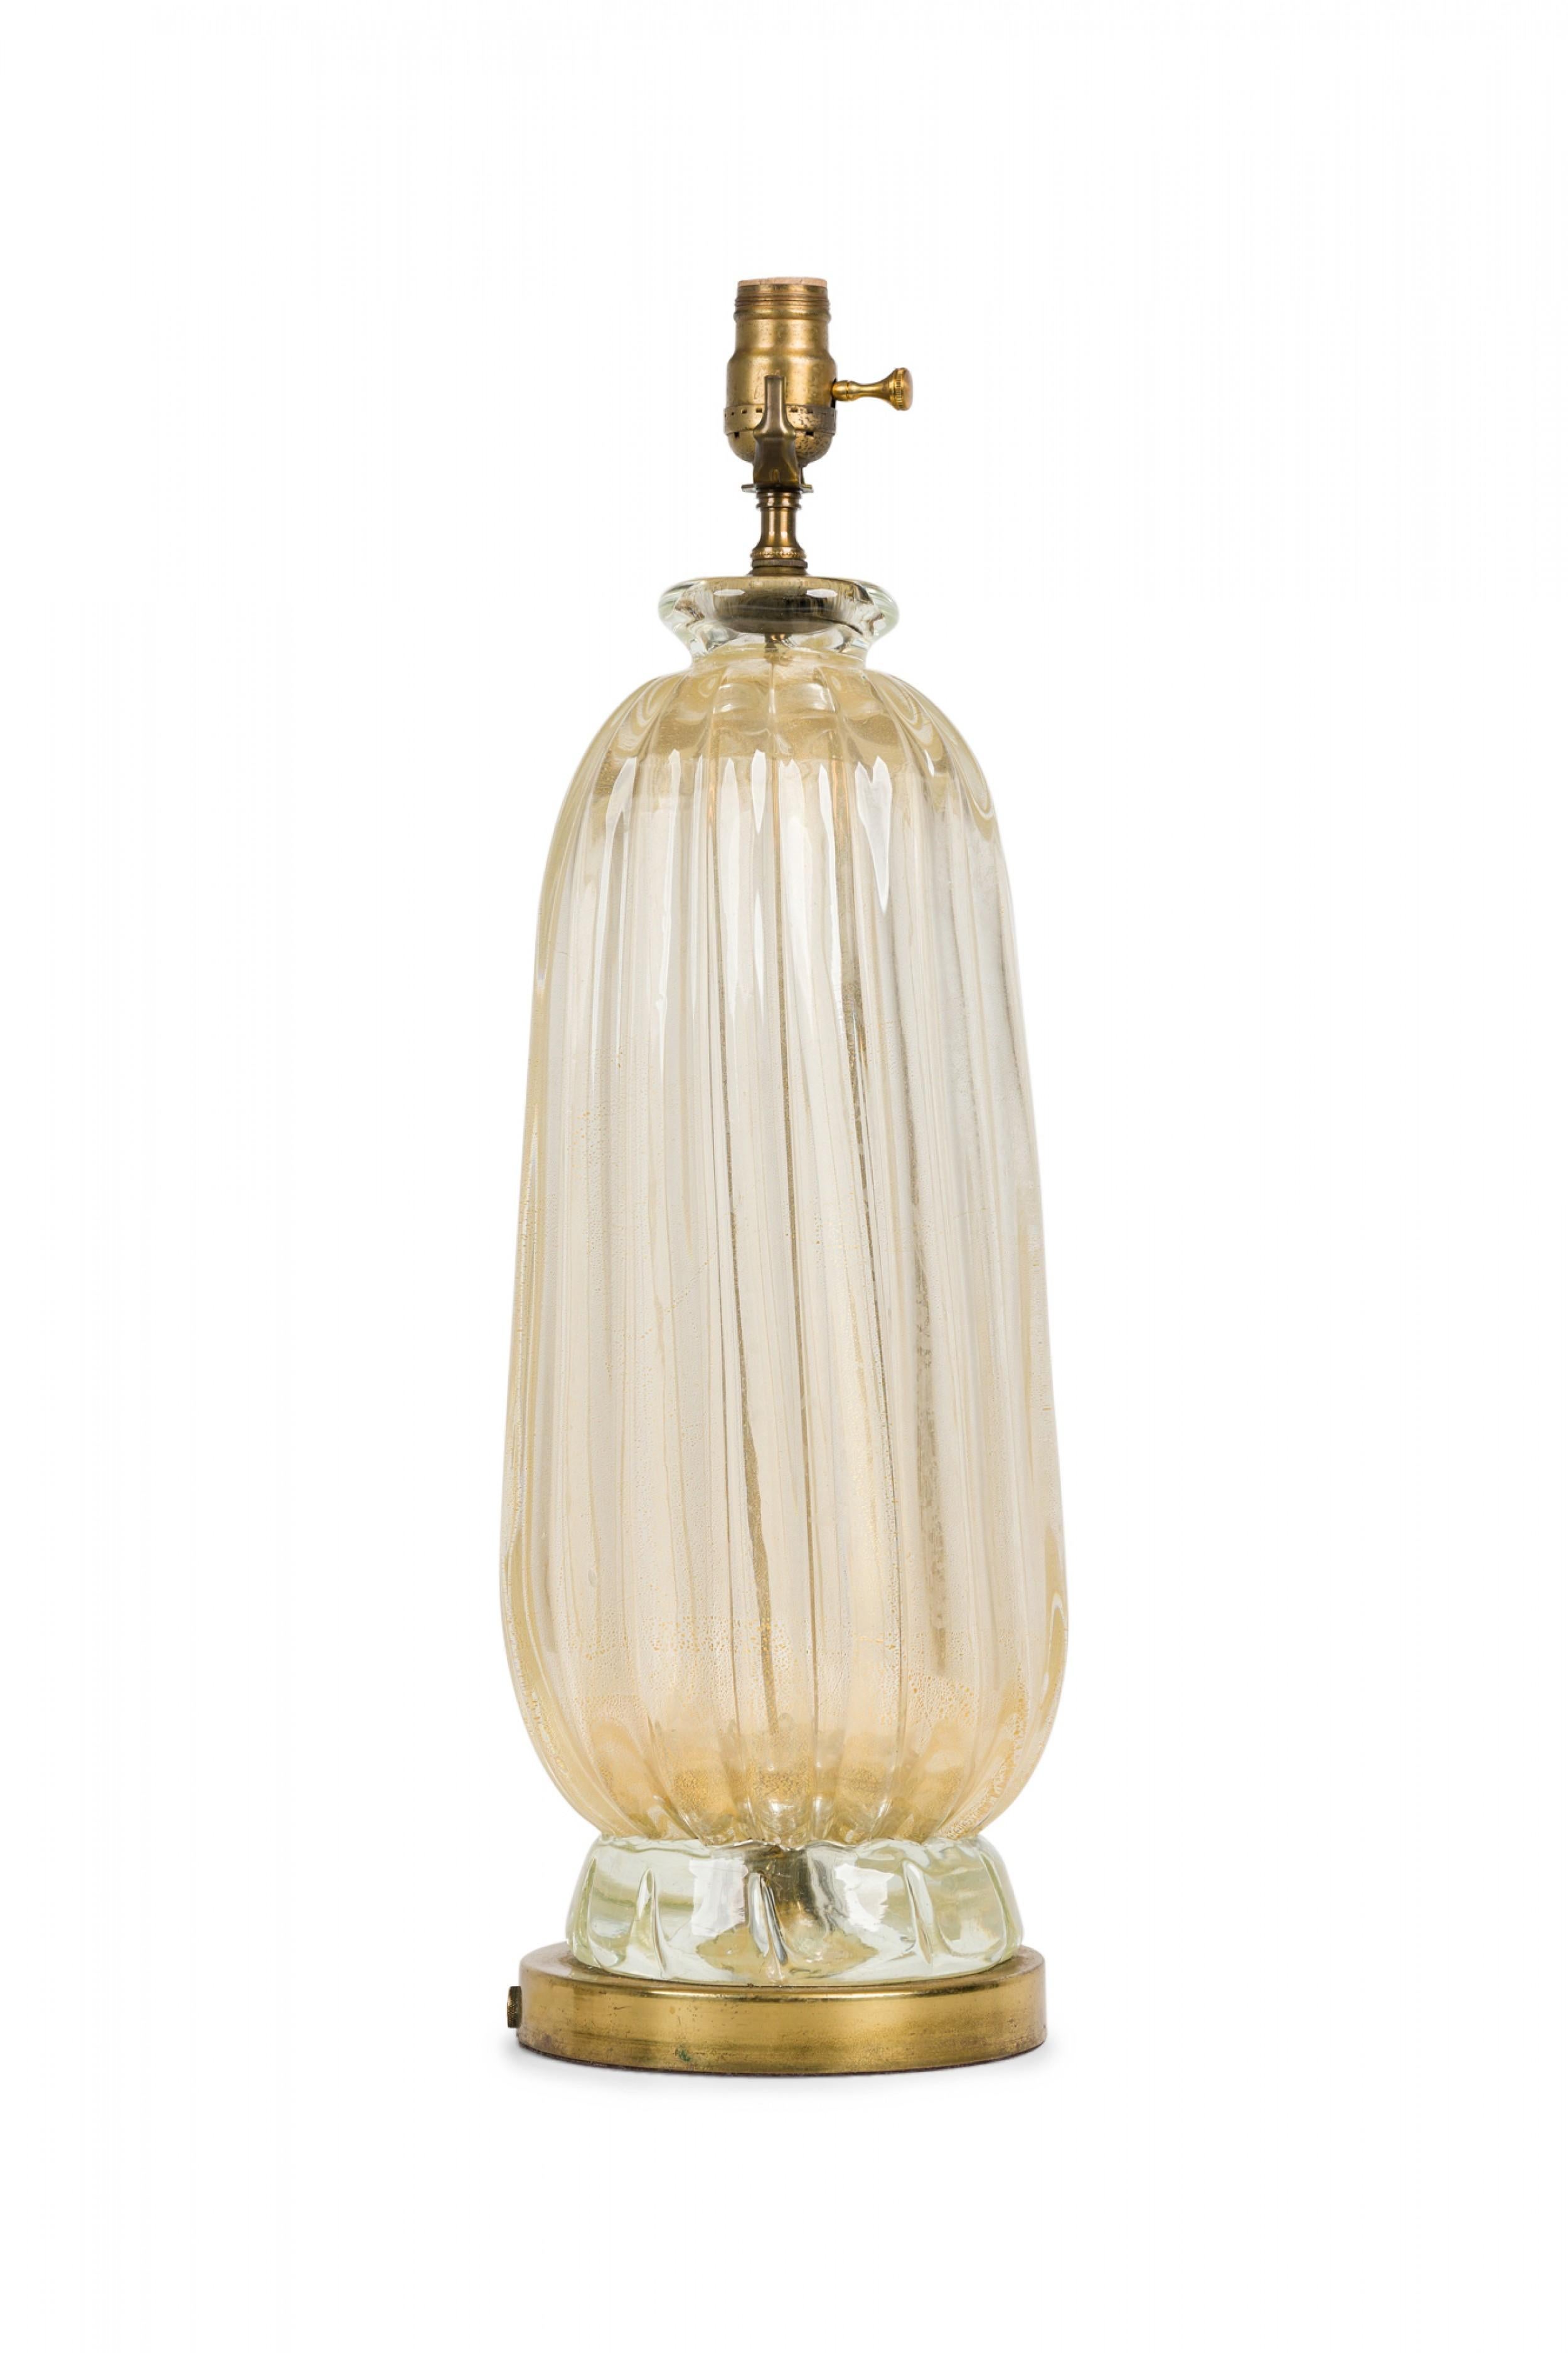 Midcentury American glass table lamp in lobed tapered ovoid form with a waisted pinched neck and extended functioning brass light switch socket, resting on a tapered bottom foot, mounted on a gilt metal flattened circular base.